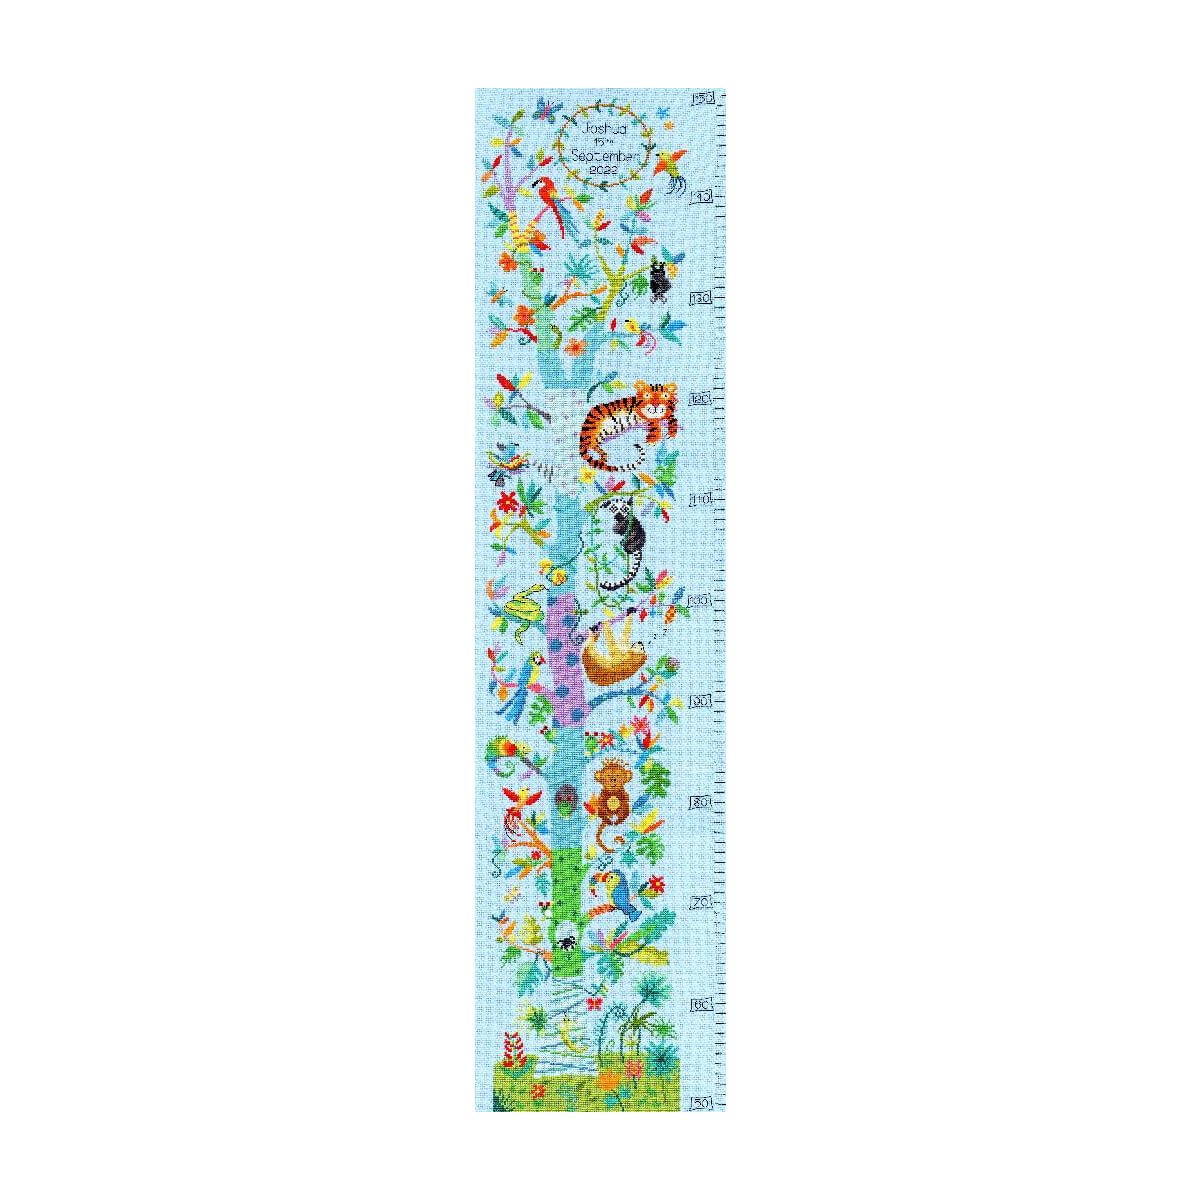 A colorful growth chart for the wall shows various...